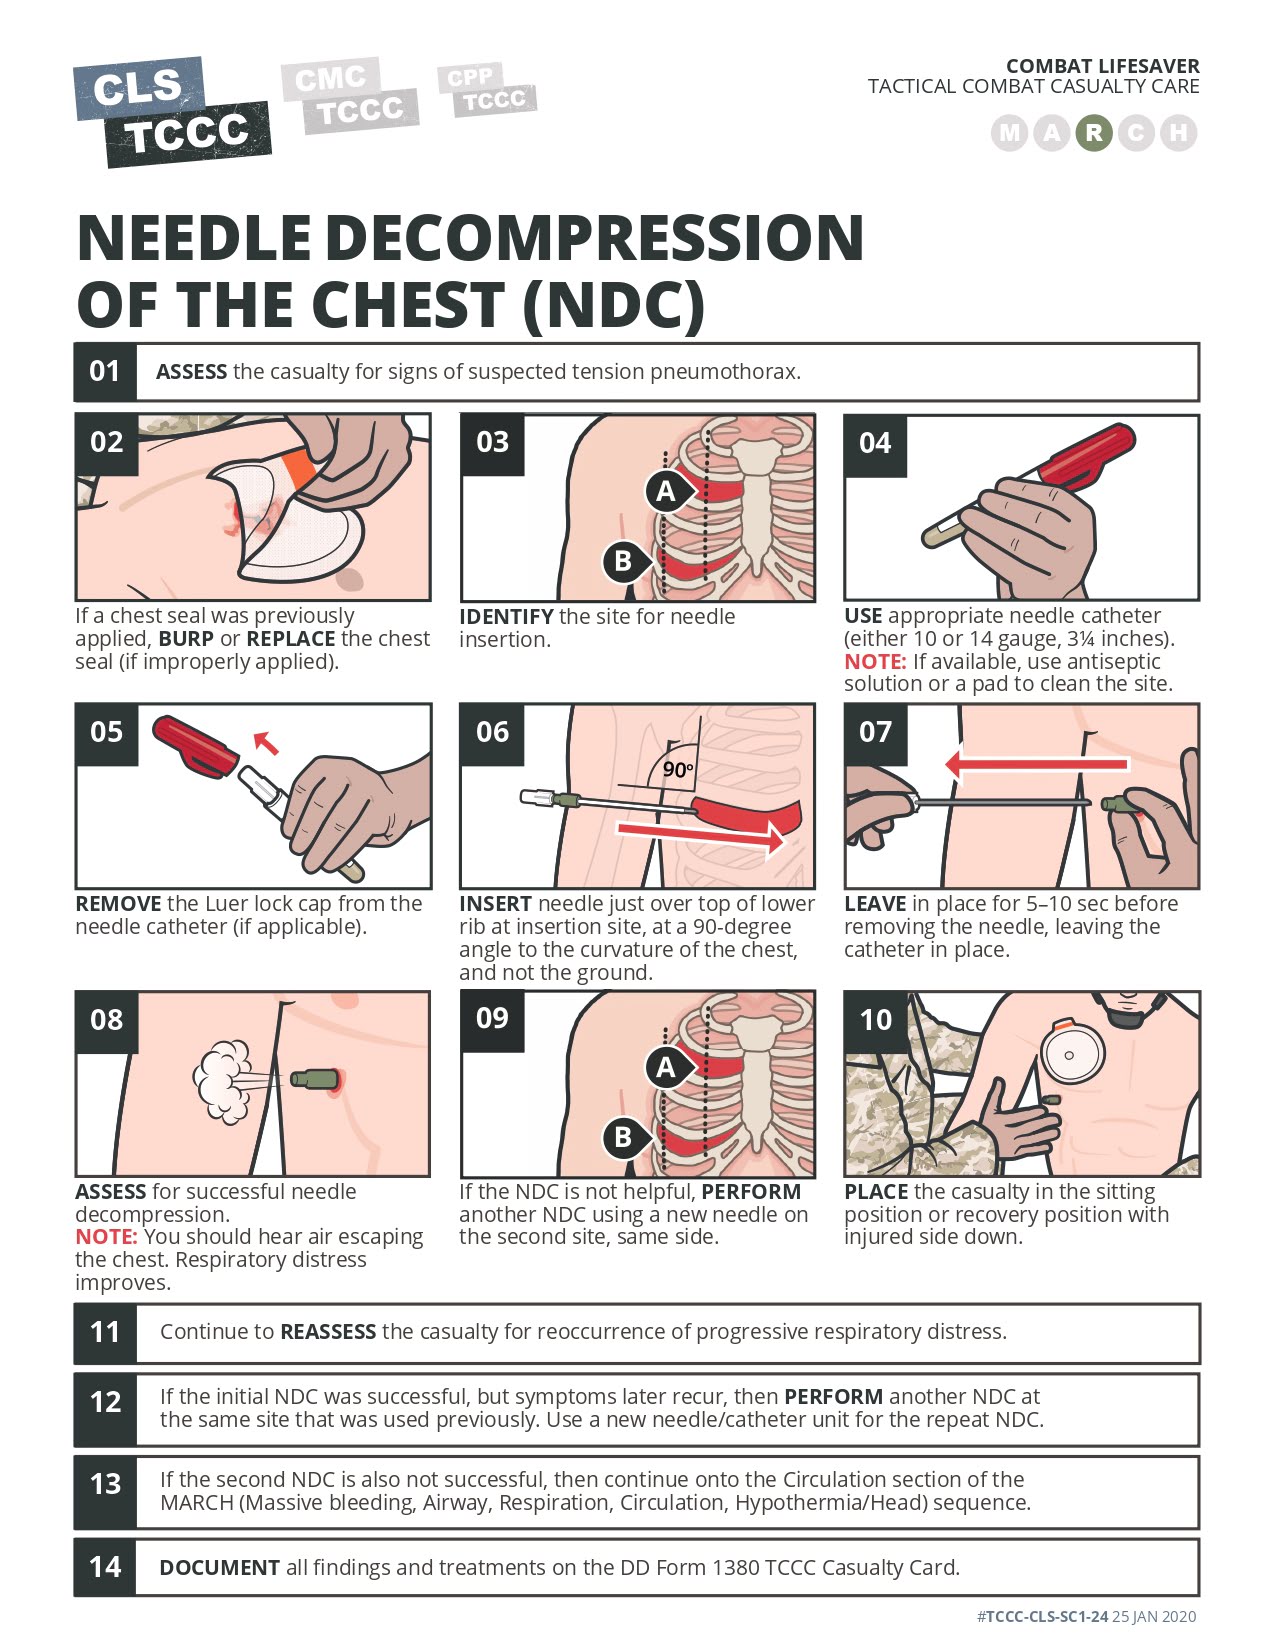 Needle decompression of the chest